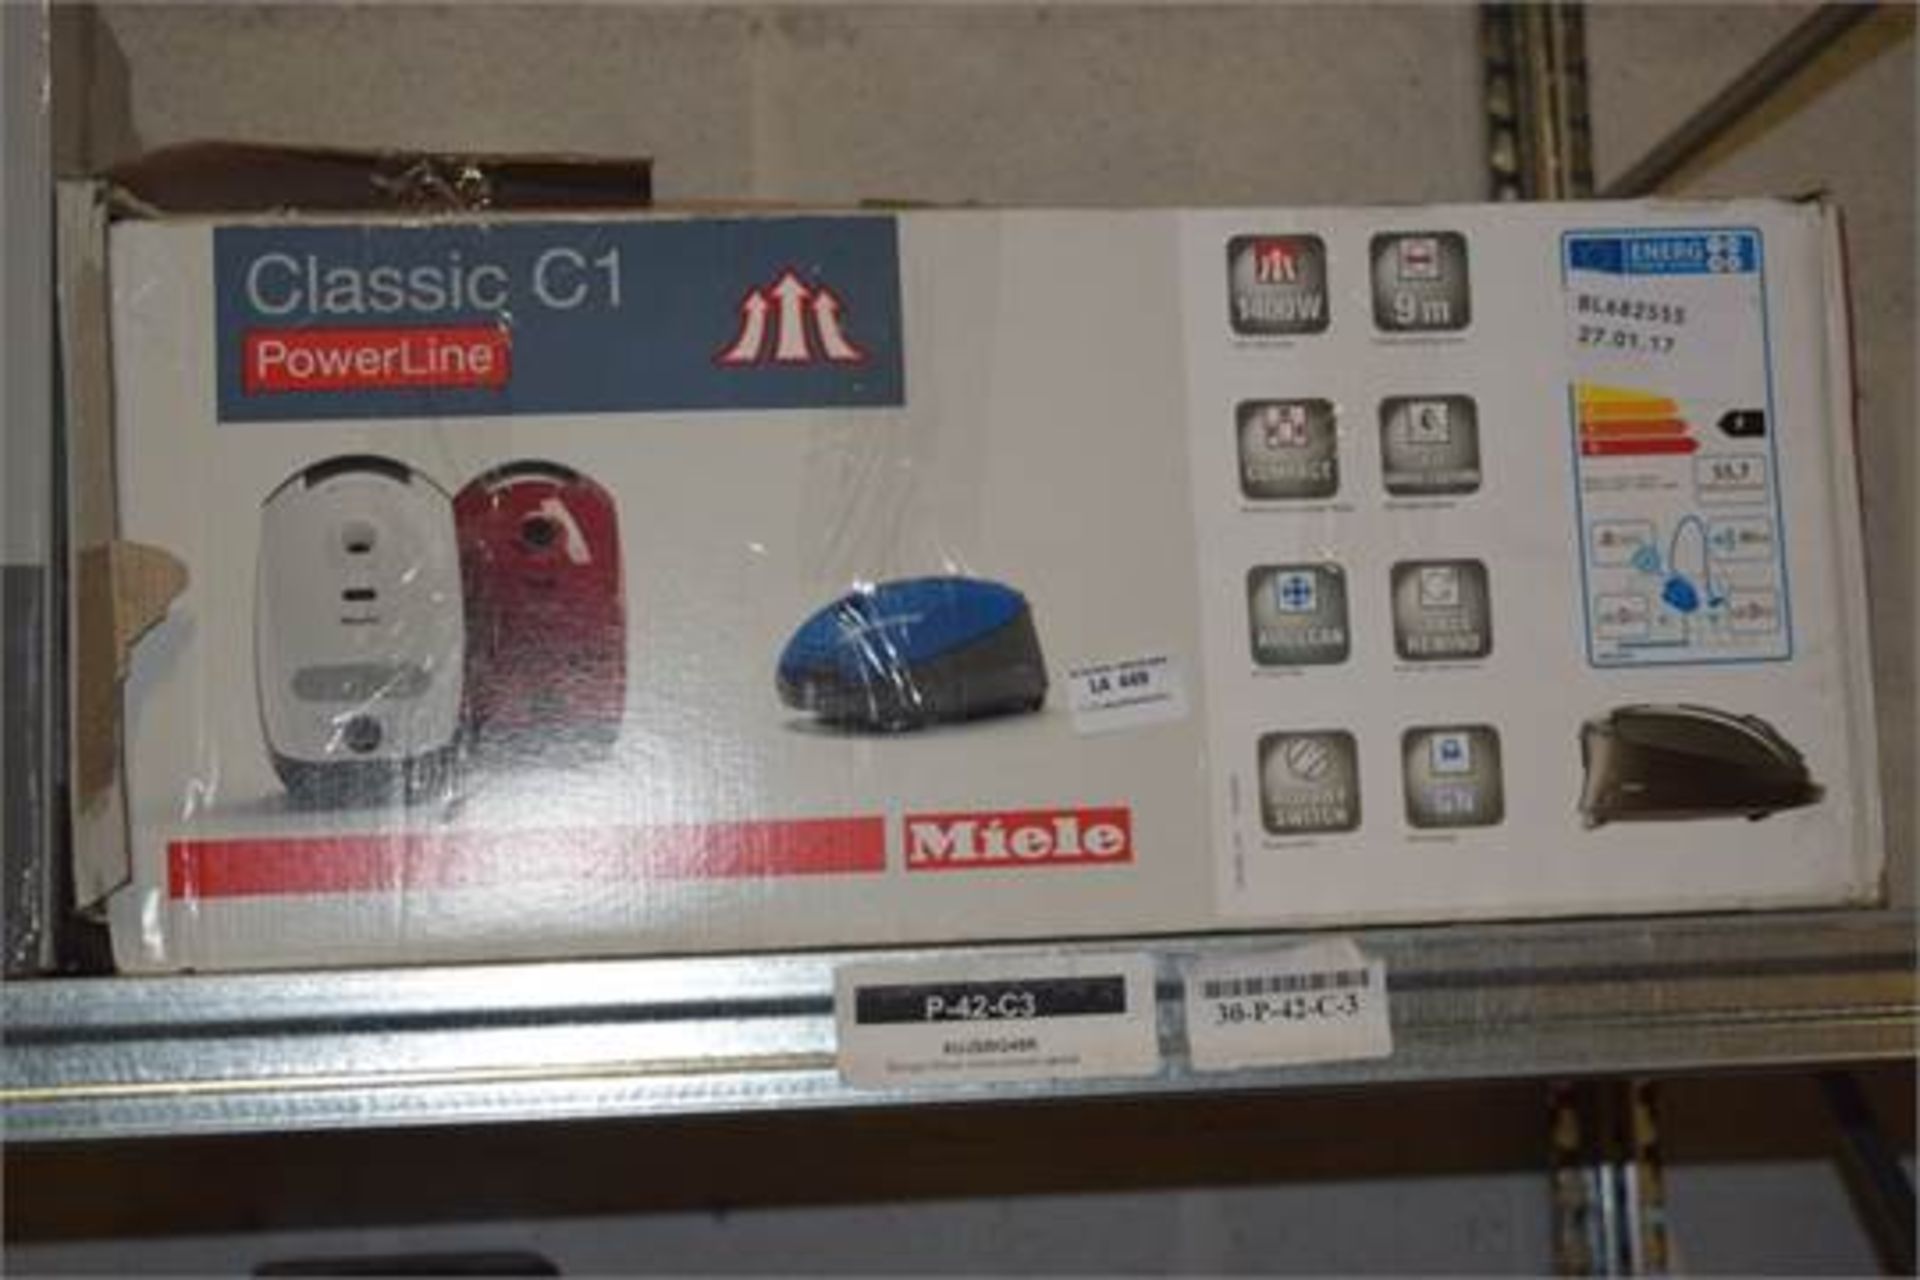 1 X BOXED MIELE CLASSIC C1 POWERLINE COMPACT VACUUM CLEANER RRP £160 27.01.17